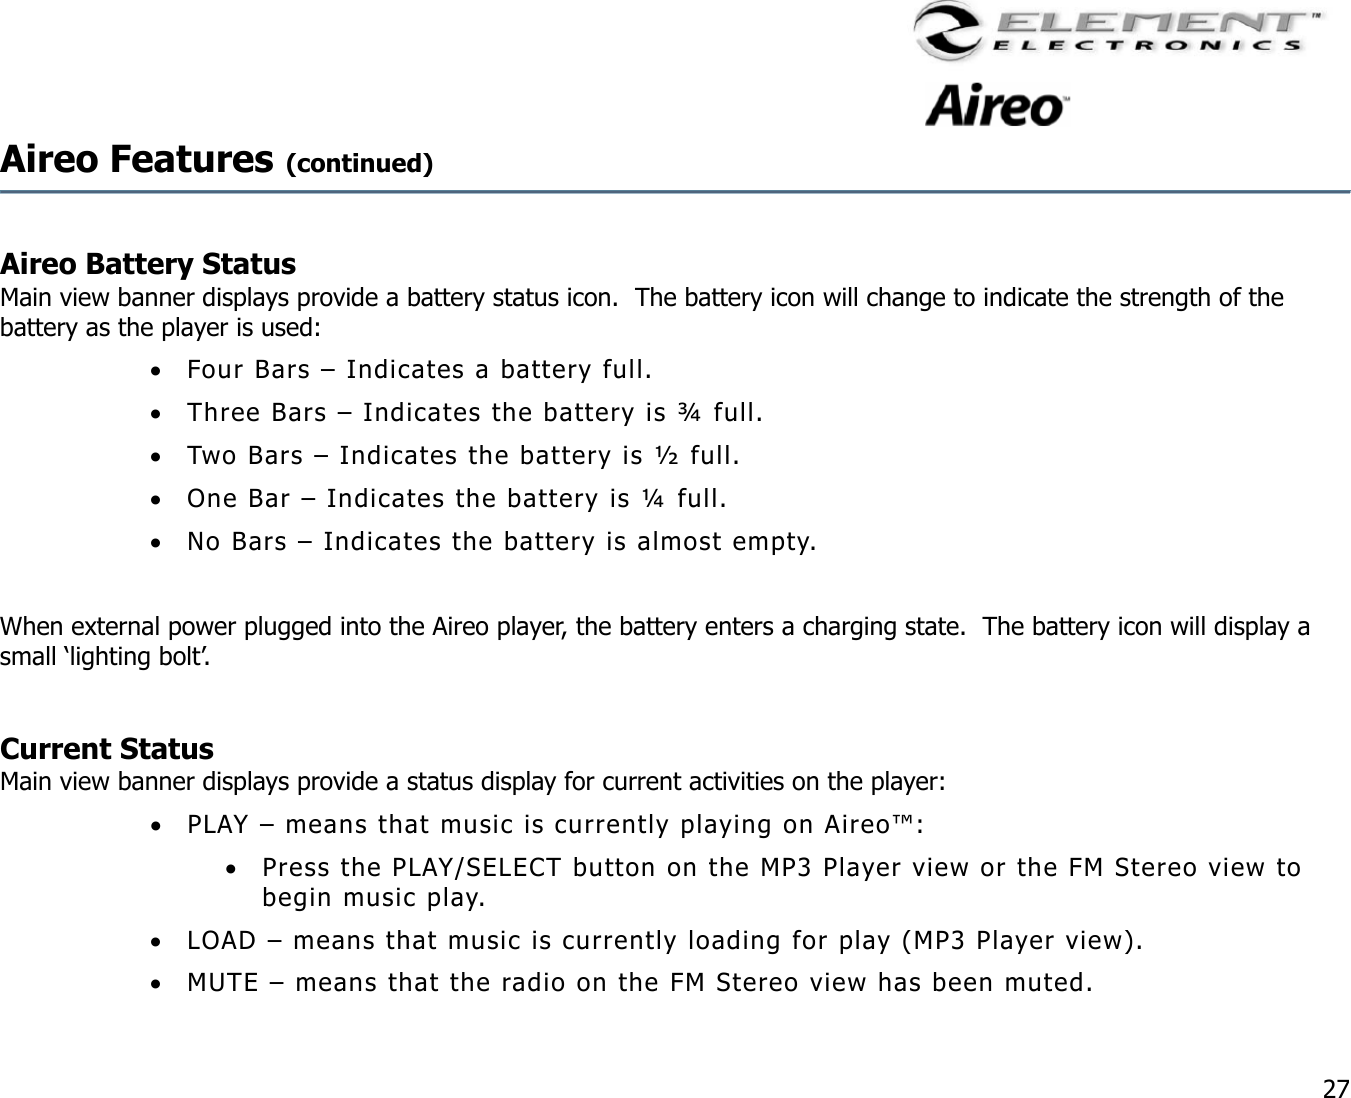                                                                                    27 Aireo Features (continued)    Aireo Battery Status   Main view banner displays provide a battery status icon.  The battery icon will change to indicate the strength of the battery as the player is used: •  Four Bars – Indicates a battery full. •  Three Bars – Indicates the battery is ¾ full. •  Two Bars – Indicates the battery is ½ full. •  One Bar – Indicates the battery is ¼ full. •  No Bars – Indicates the battery is almost empty.  When external power plugged into the Aireo player, the battery enters a charging state.  The battery icon will display a small ‘lighting bolt’.    Current Status Main view banner displays provide a status display for current activities on the player:  •  PLAY – means that music is currently playing on Aireo™: •  Press the PLAY/SELECT button on the MP3 Player view or the FM Stereo view to begin music play. •  LOAD – means that music is currently loading for play (MP3 Player view). •  MUTE – means that the radio on the FM Stereo view has been muted. 